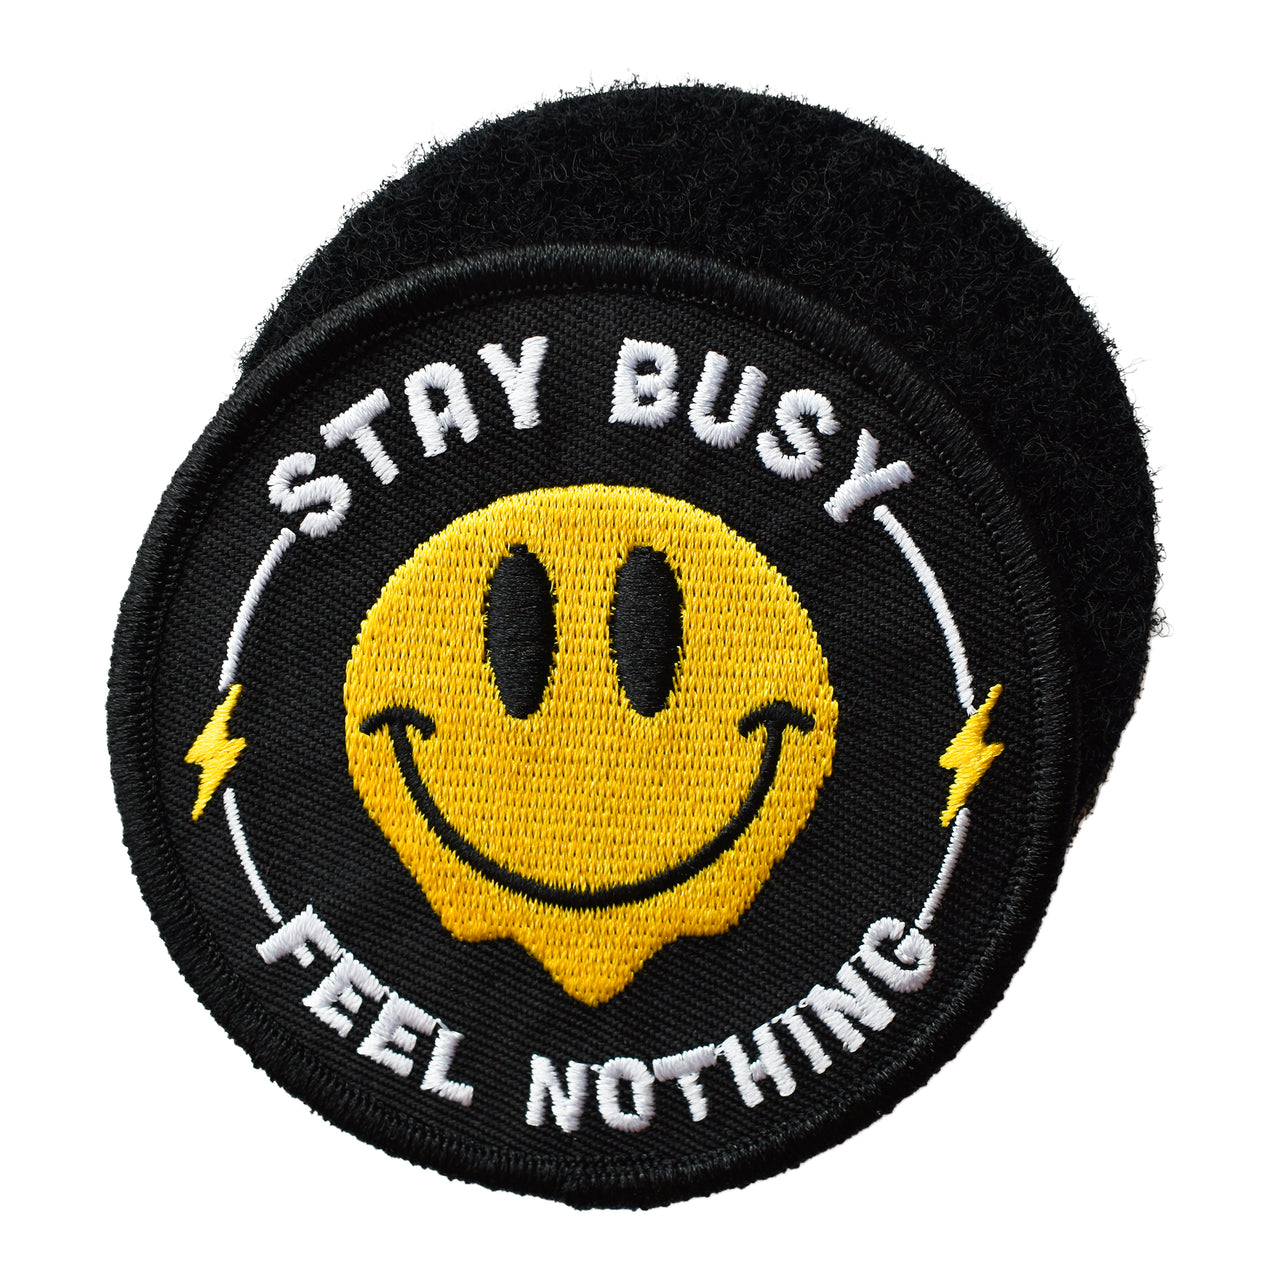 Stay Busy, Feel Nothing (Hook & Loop Patch)